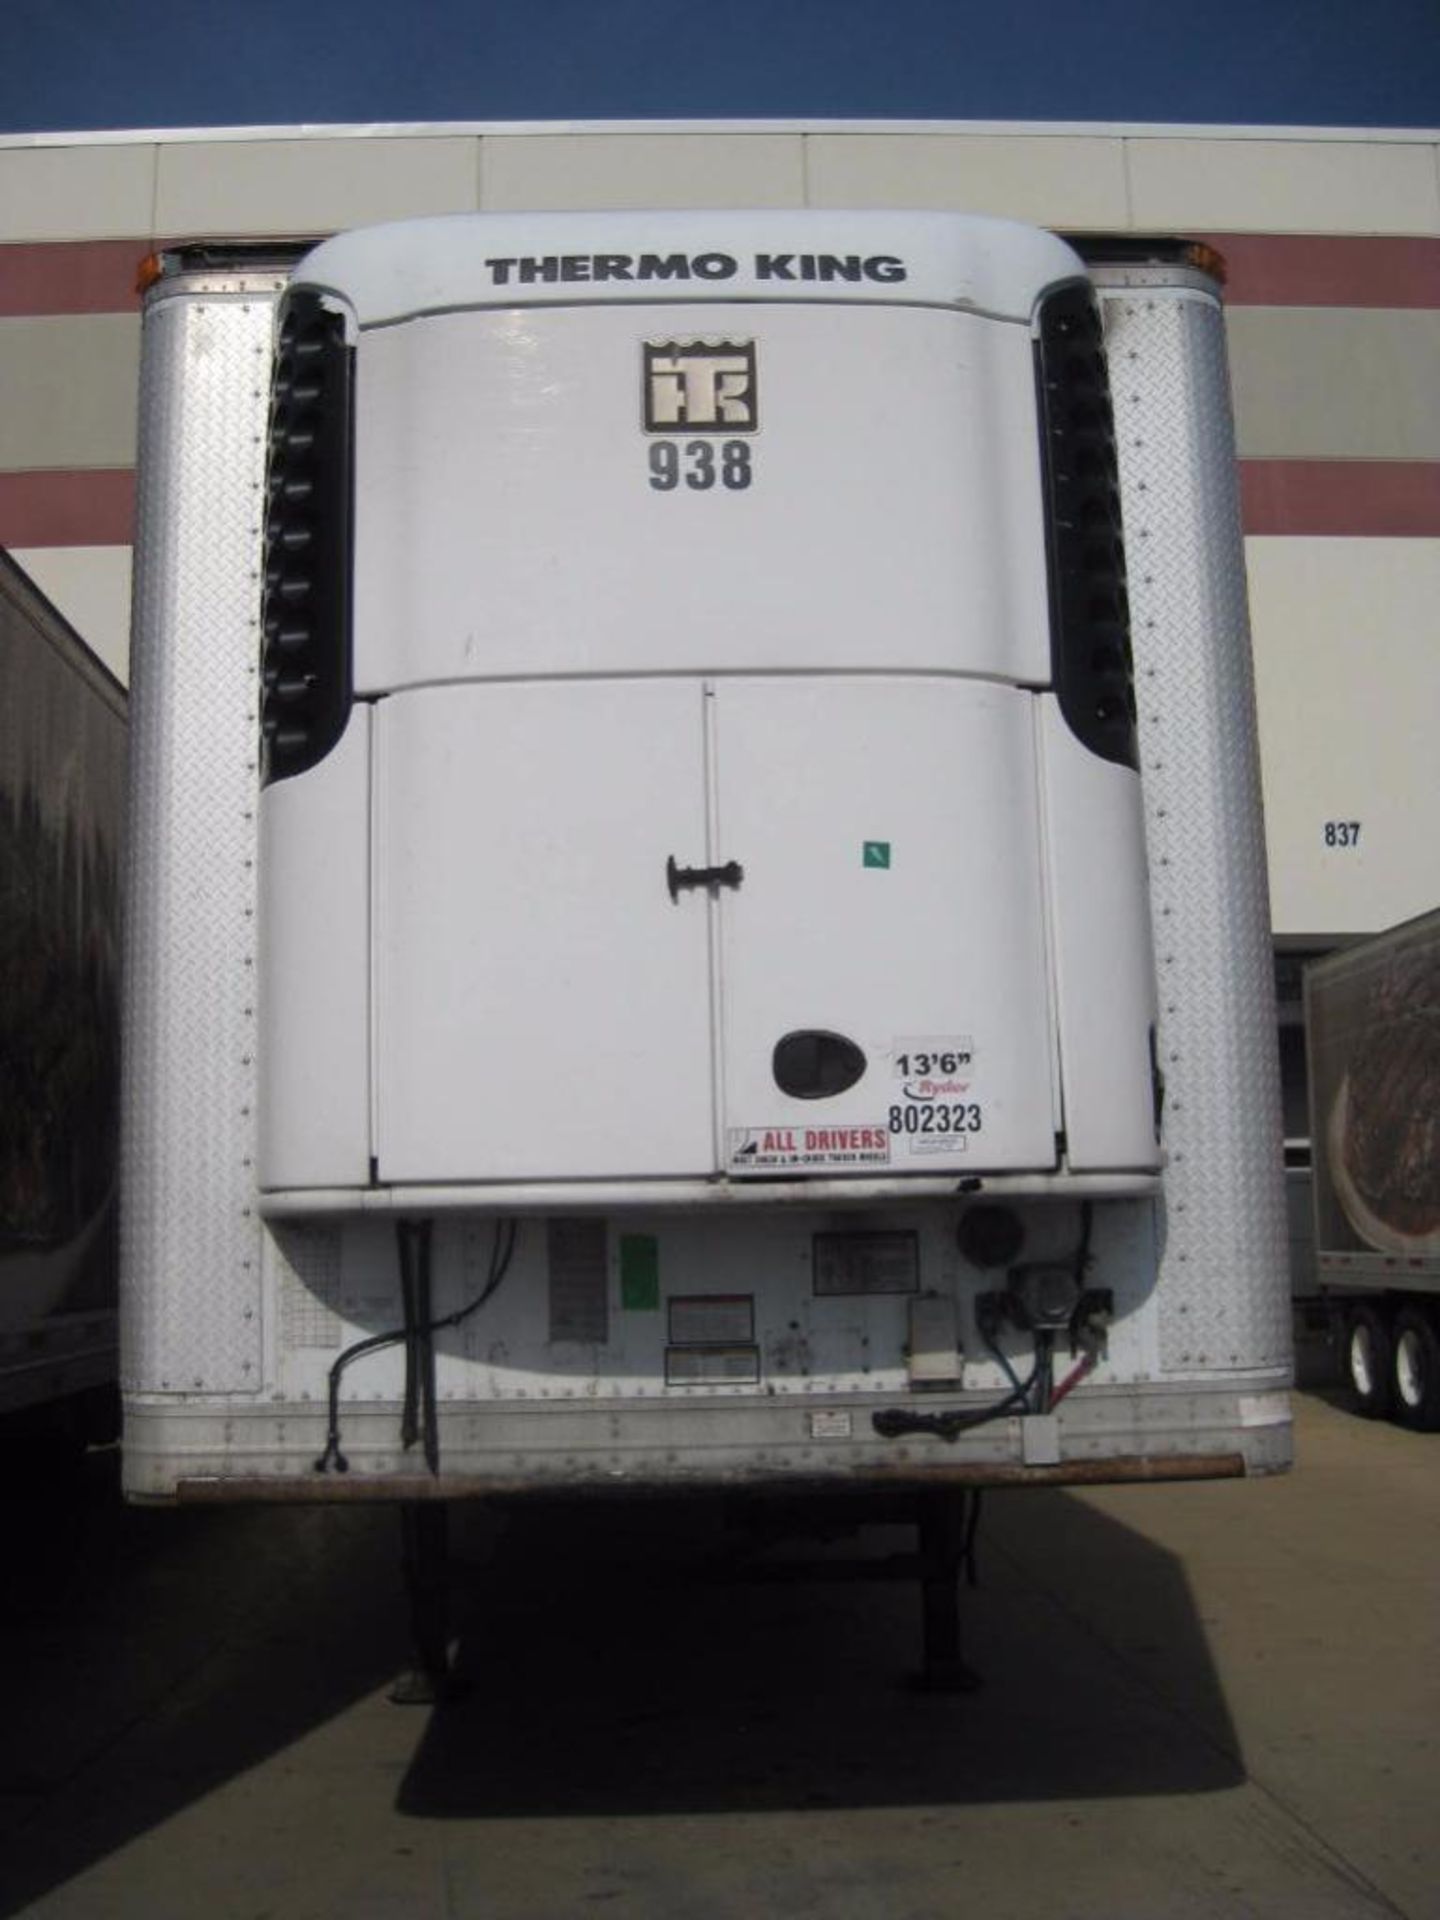 2006 Great Dane 48' Refrigerated Trailer, VIN # 1GRAA96256B707600, Unit 938 - Image 4 of 8